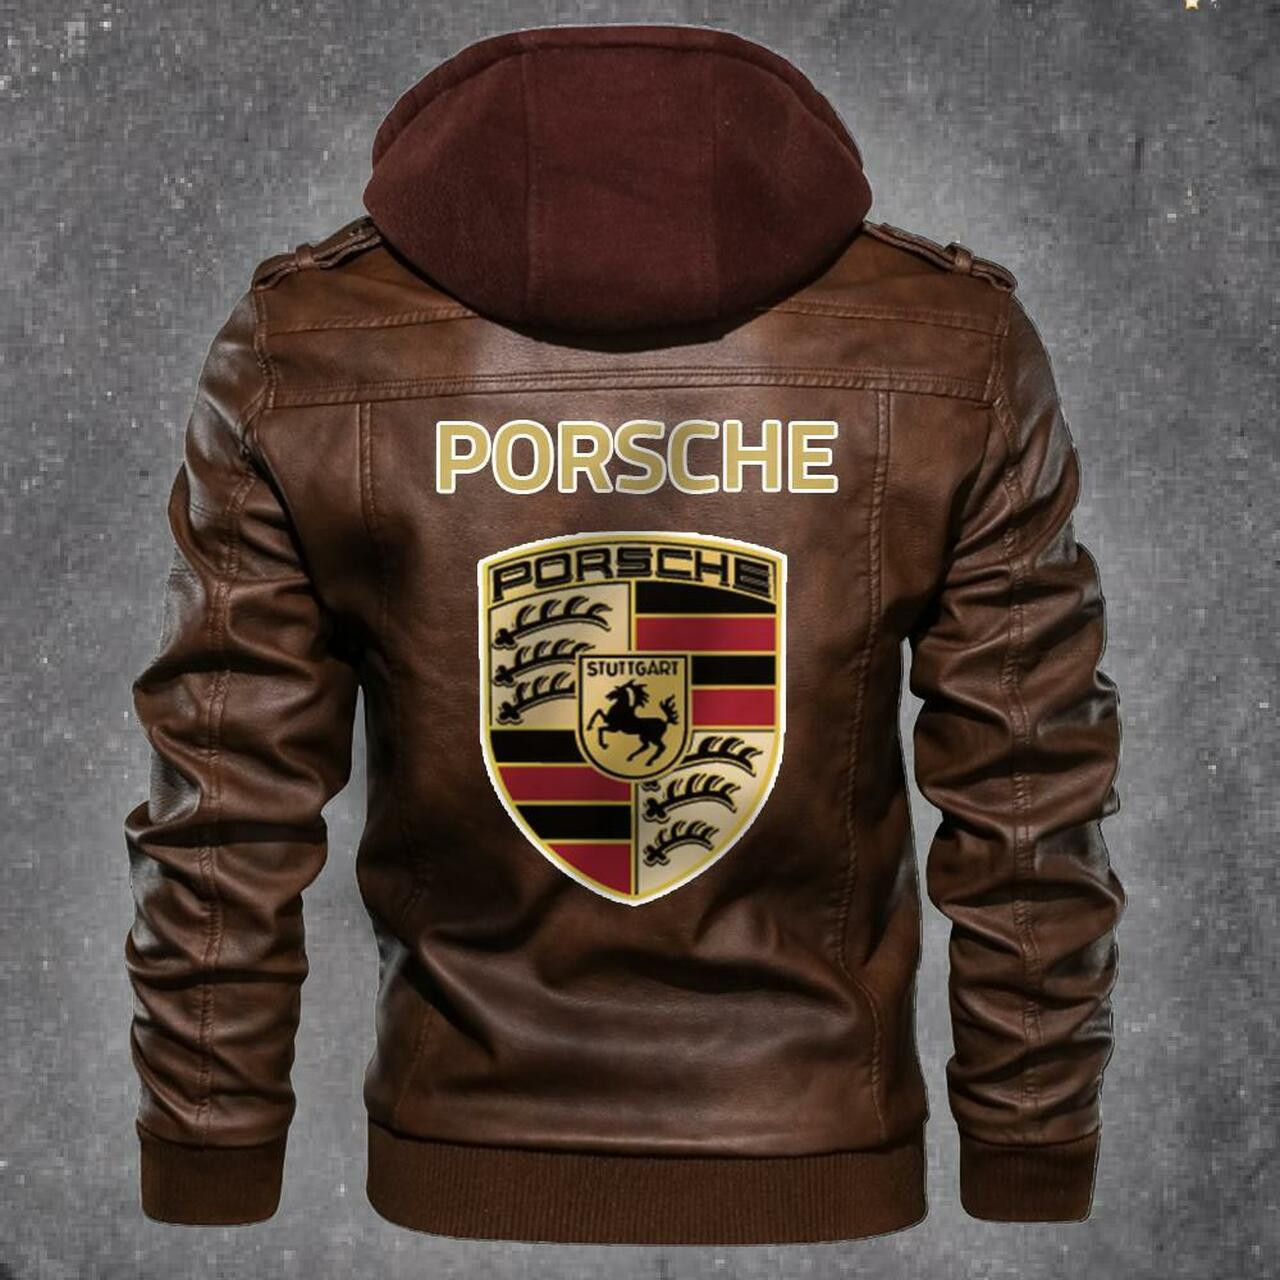 Check out and find the right leather jacket below 217